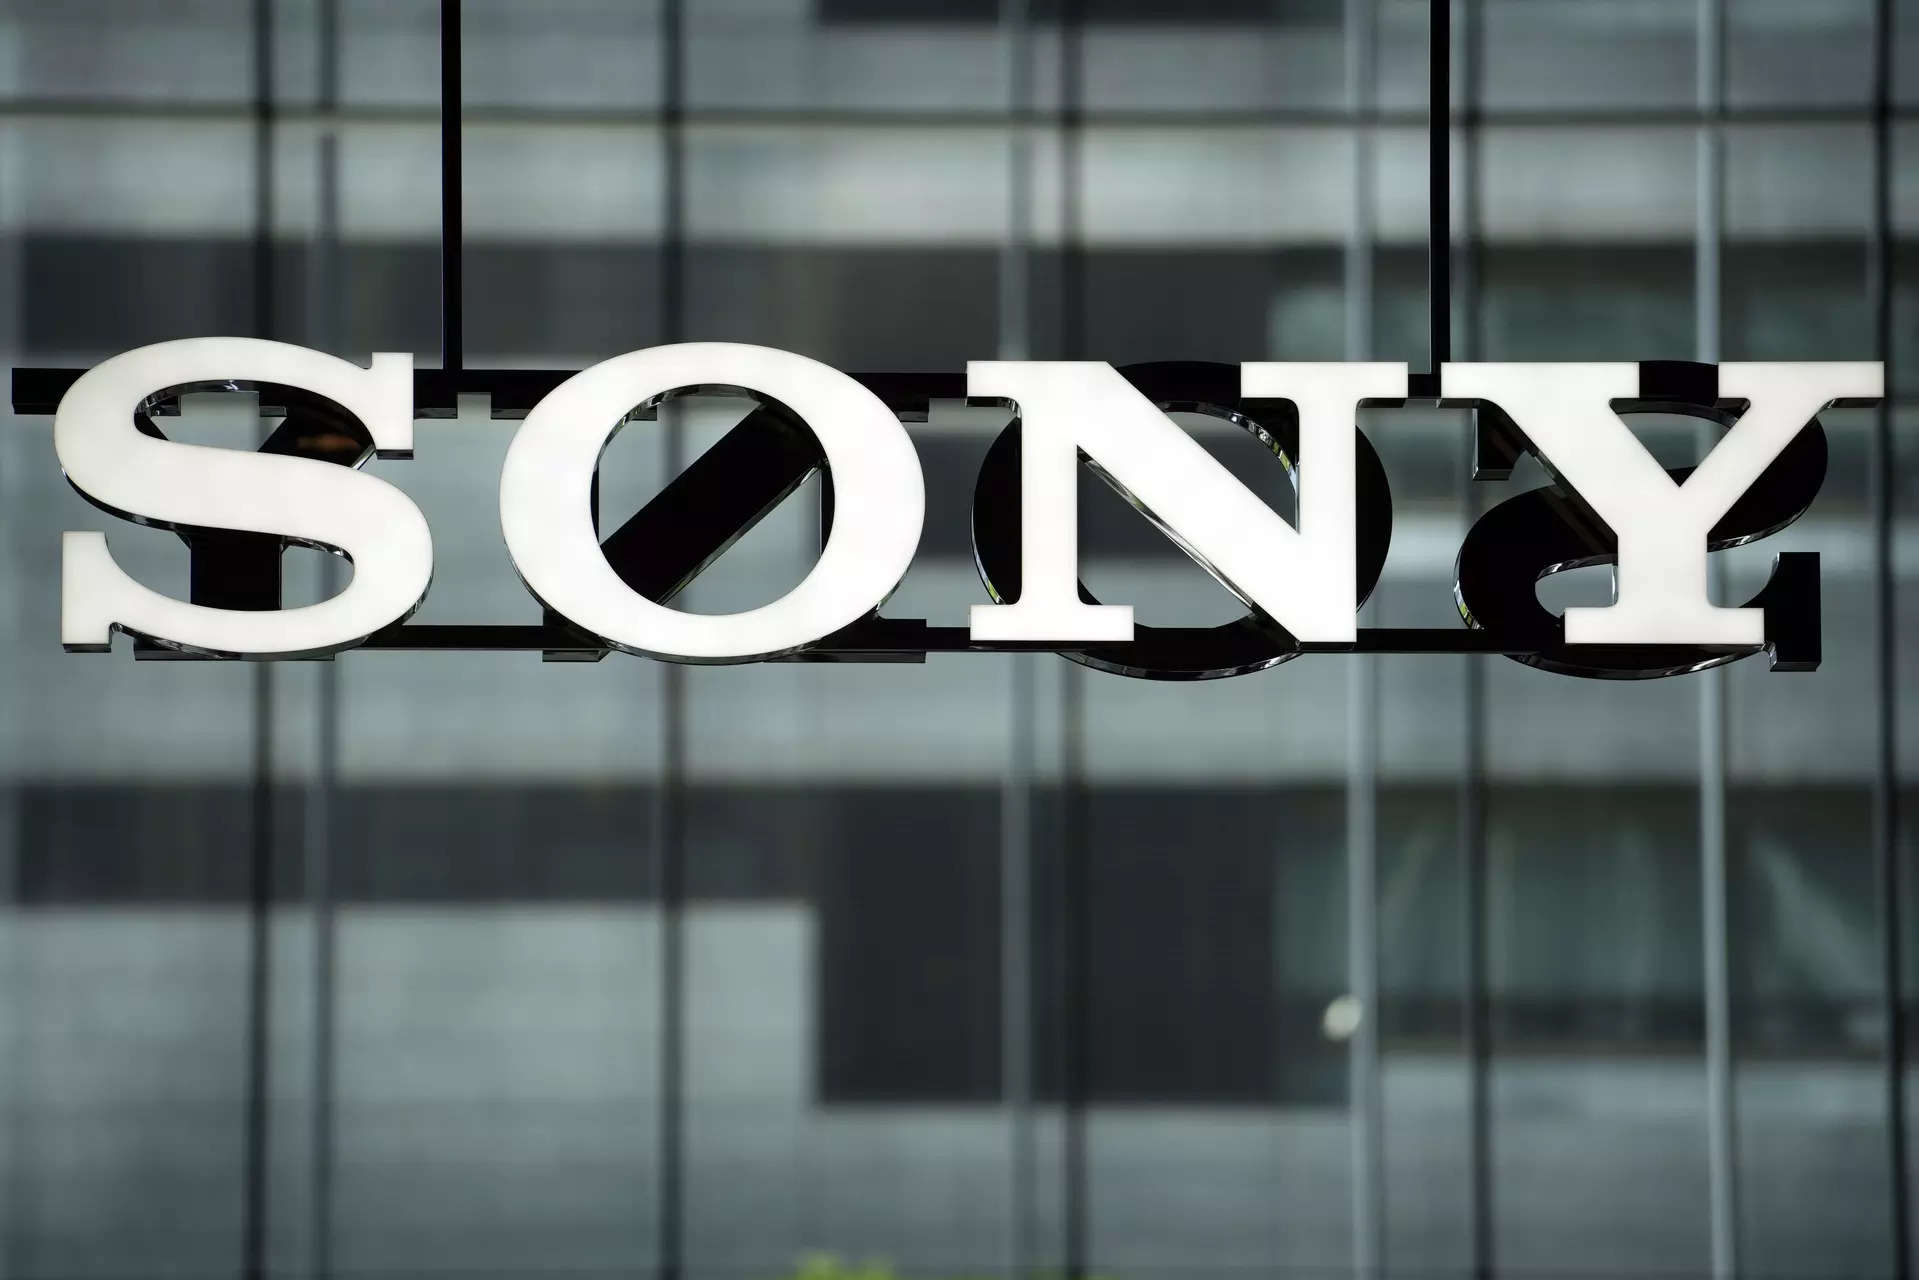 <p>FILE - A Sony logo is seen at the headquarters of Sony Corp. on May 10, 2022, in Tokyo. A bipartisan group of Nevada lawmakers introduced a bill Thursday, May 11, 2023, that would give record tax credits to expand film production in southern Nevada, including a Sony expansion in Las Vegas. (AP Photo/Eugene Hoshiko, File)</p>